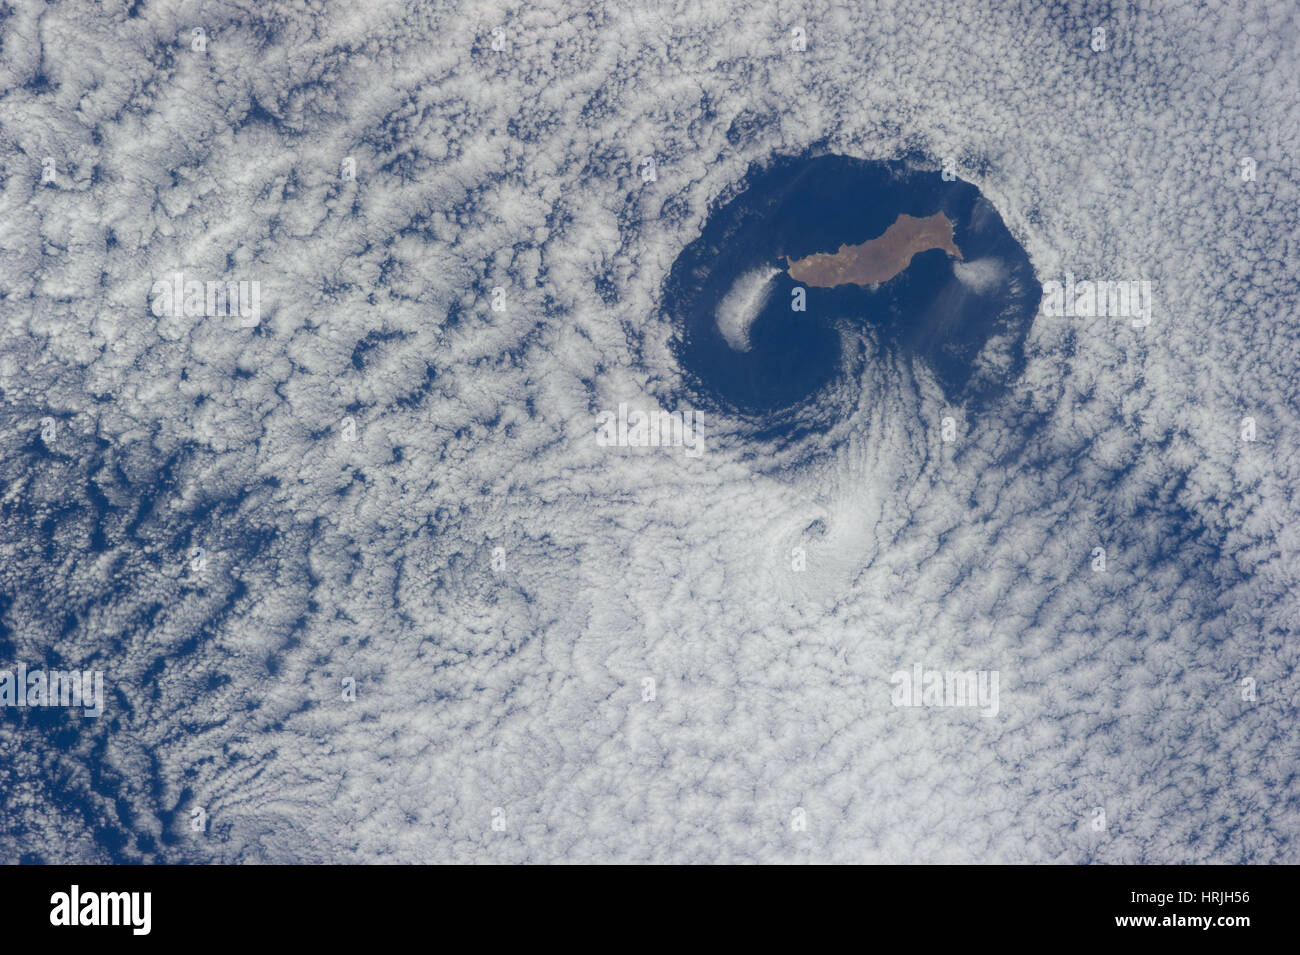 Guadalupe Island and Karman Vortex Clouds Stock Photo